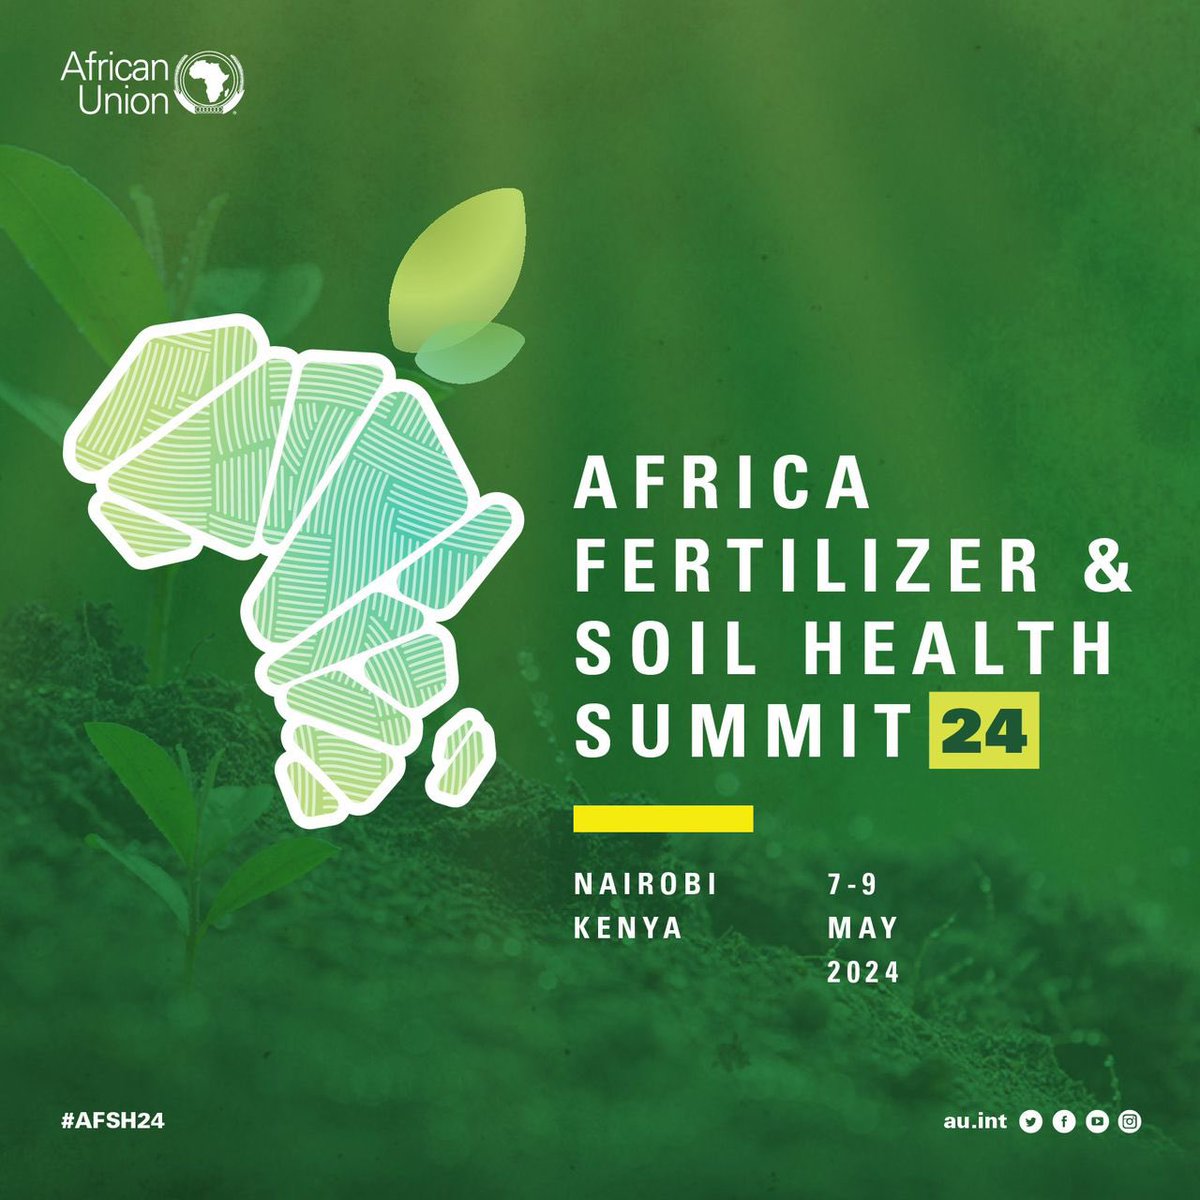 In recent years, there has been an increase in the utilization of African mineral resources for fertilizer production. However, majority of this production is exported which motivates rethinking of long-term investments in fertilizer production plants and blending facilities.